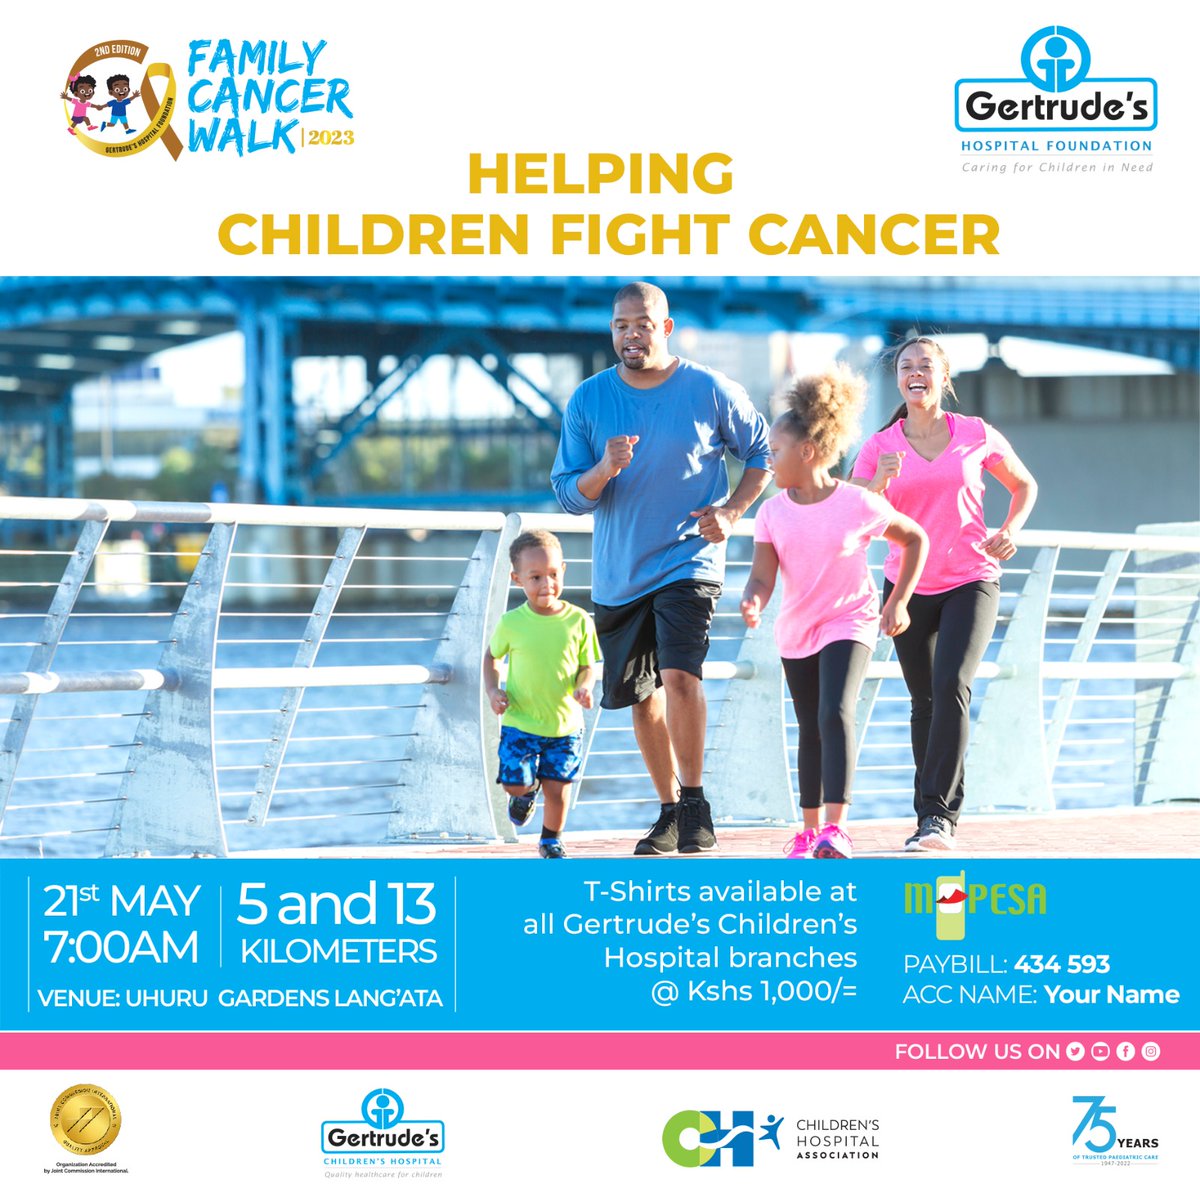 Taking Steps Together: Join our Annual Family Charity Walk for a cause and help children fight cancer!
Call 0705144316 for details and purchase of T-shirts!
#GertrudesKe #UlizaDaktari #AnnualFamilyWalk2023